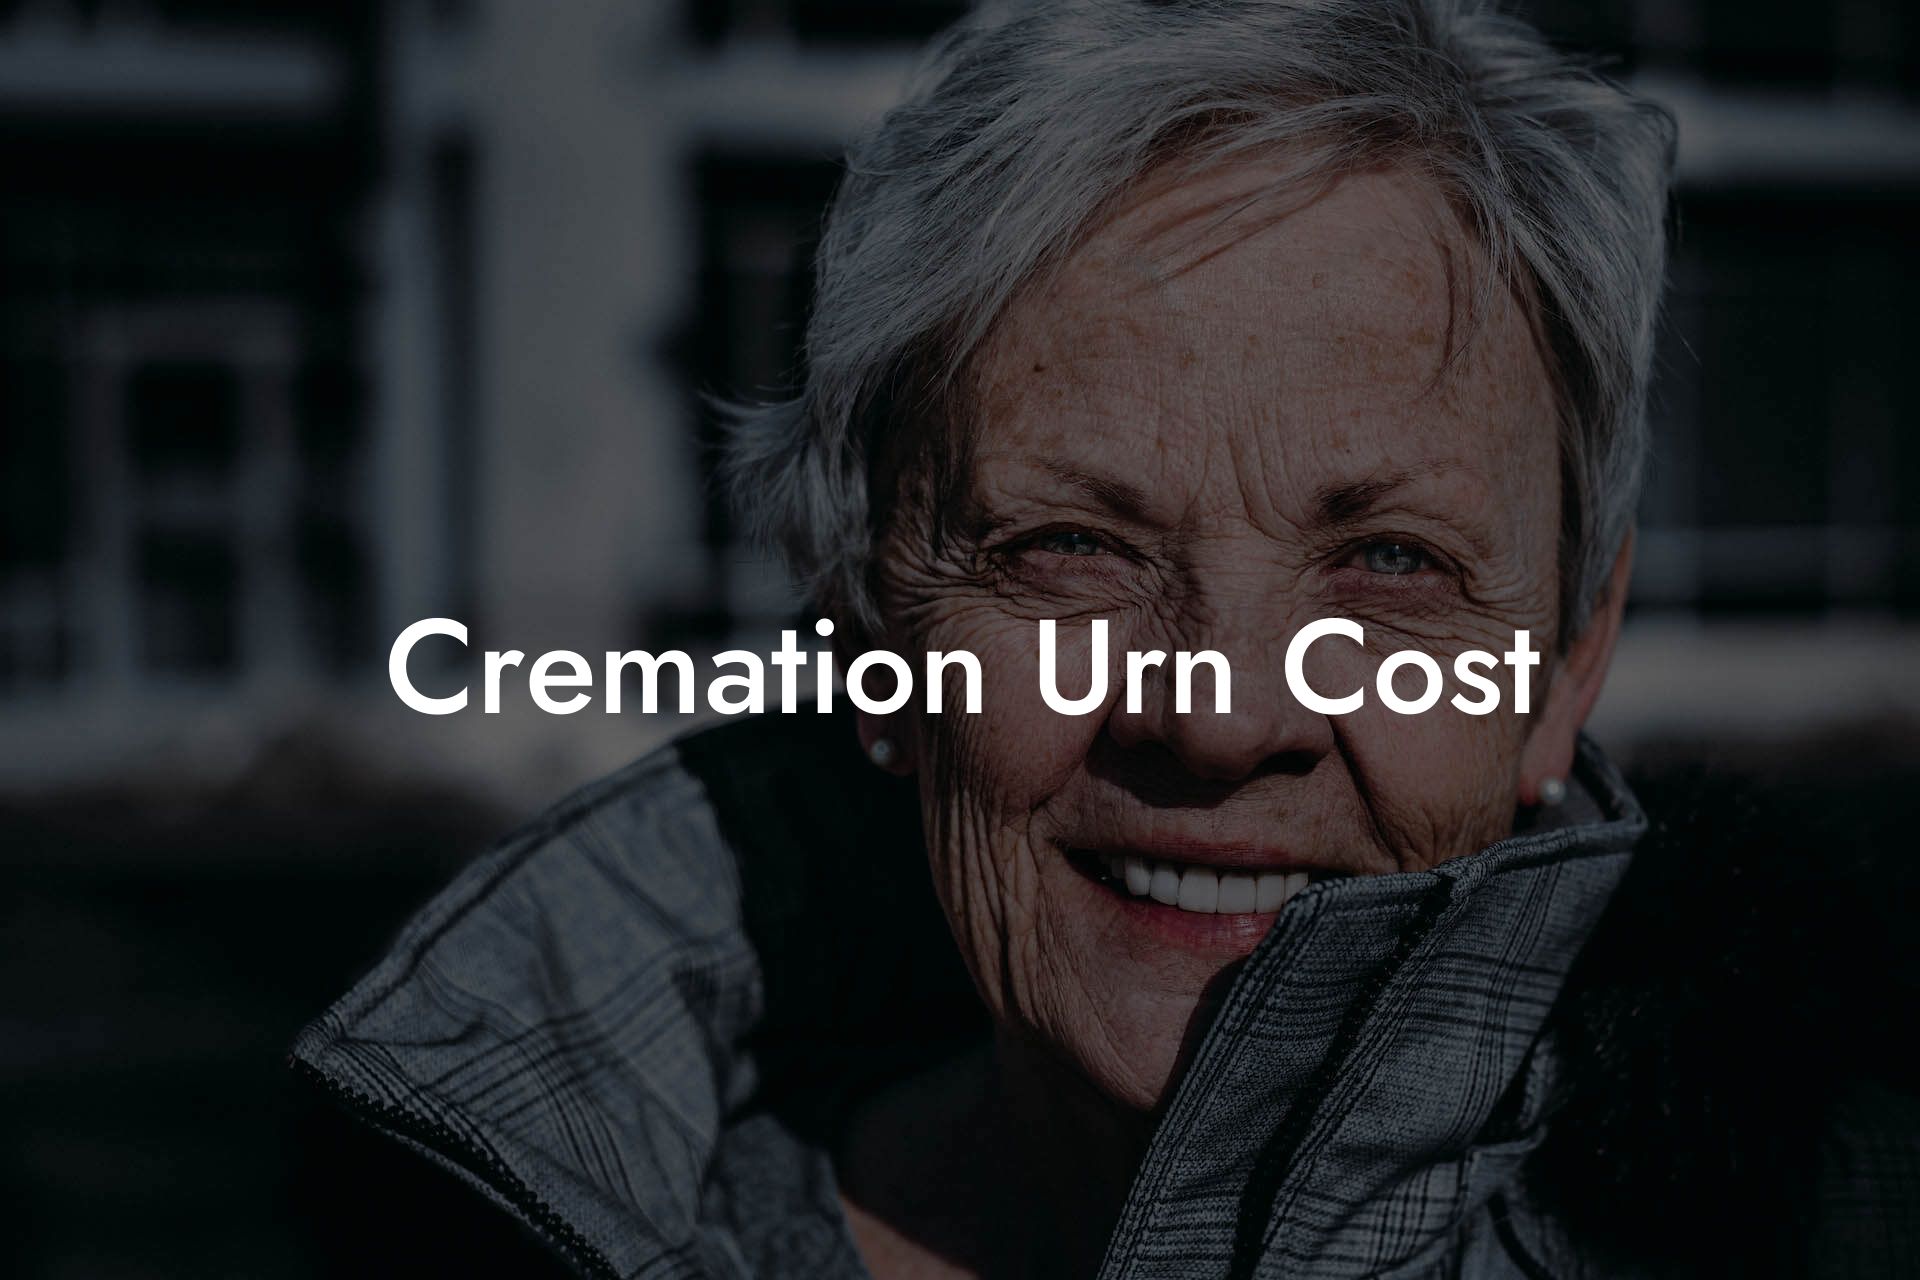 Cremation Urn Cost